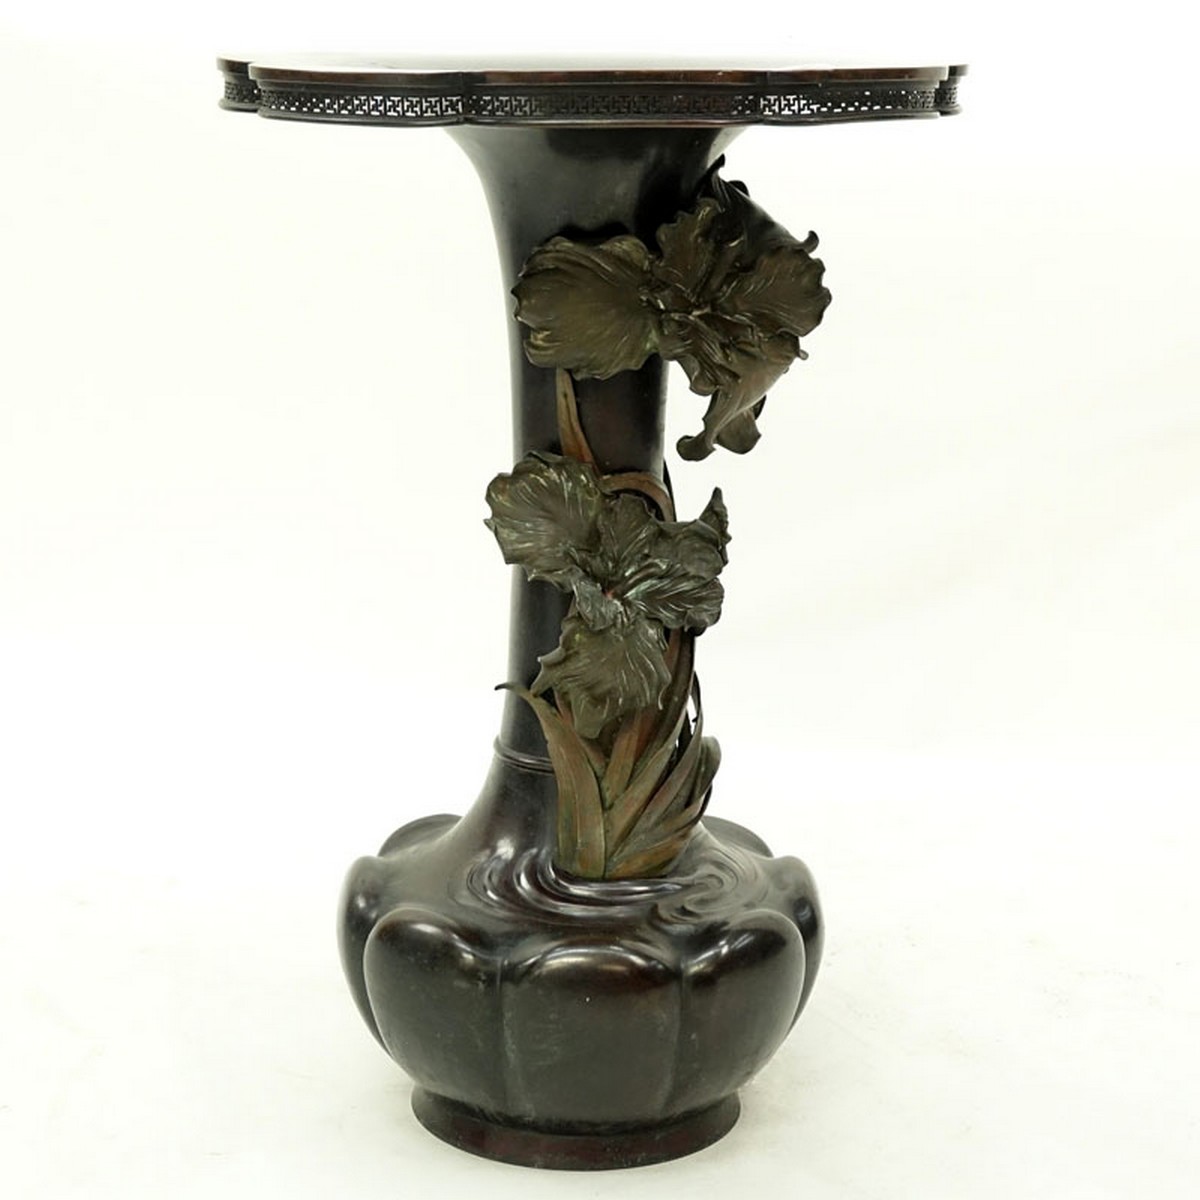 Large 19th Century Japanese Patinated Bronze High Relief Vase with Wide Flared Reticulated Rim. Signed.